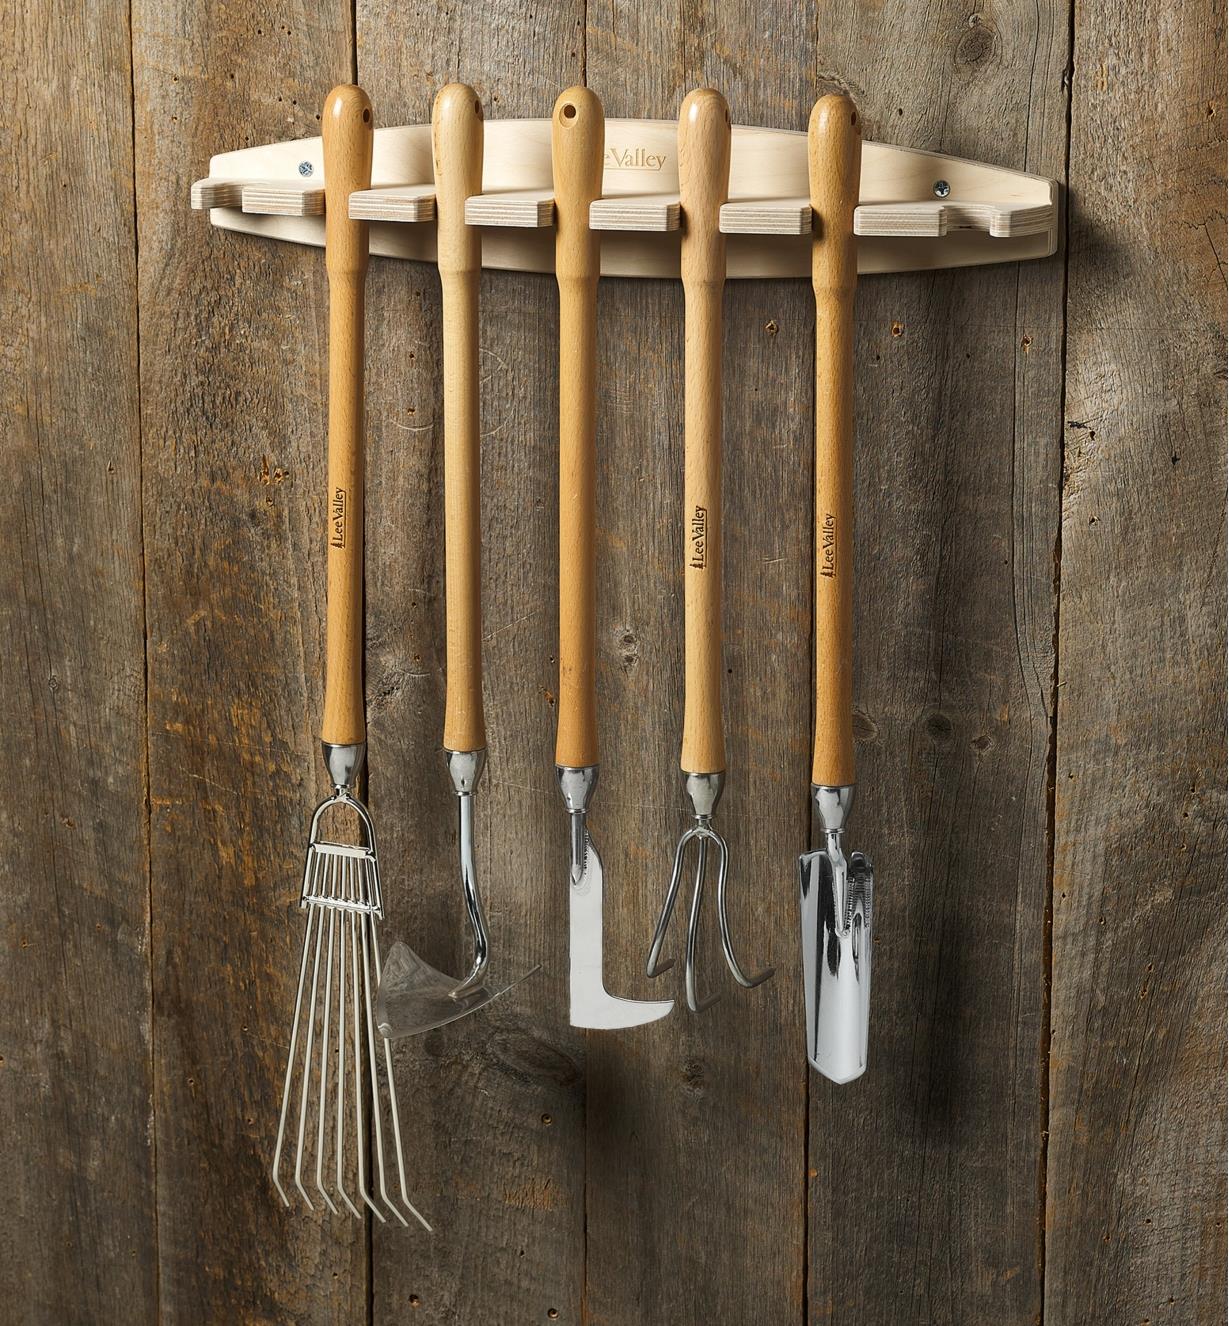 Five mid-length garden tools hanging on a rack mounted on a barnboard shed wall